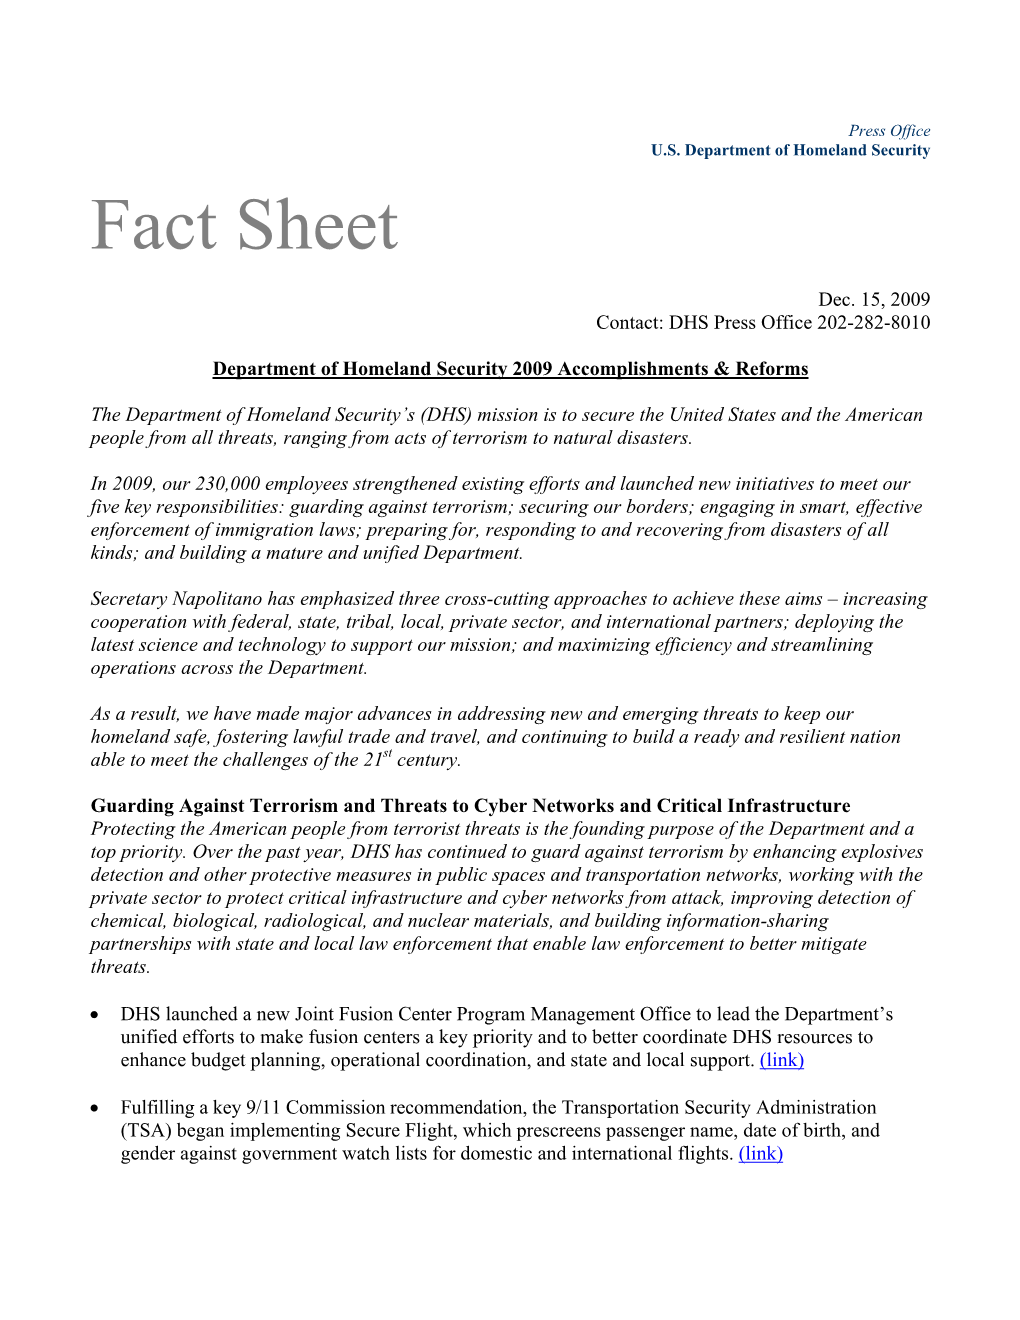 Department of Homeland Security 2009 Accomplishments & Reforms